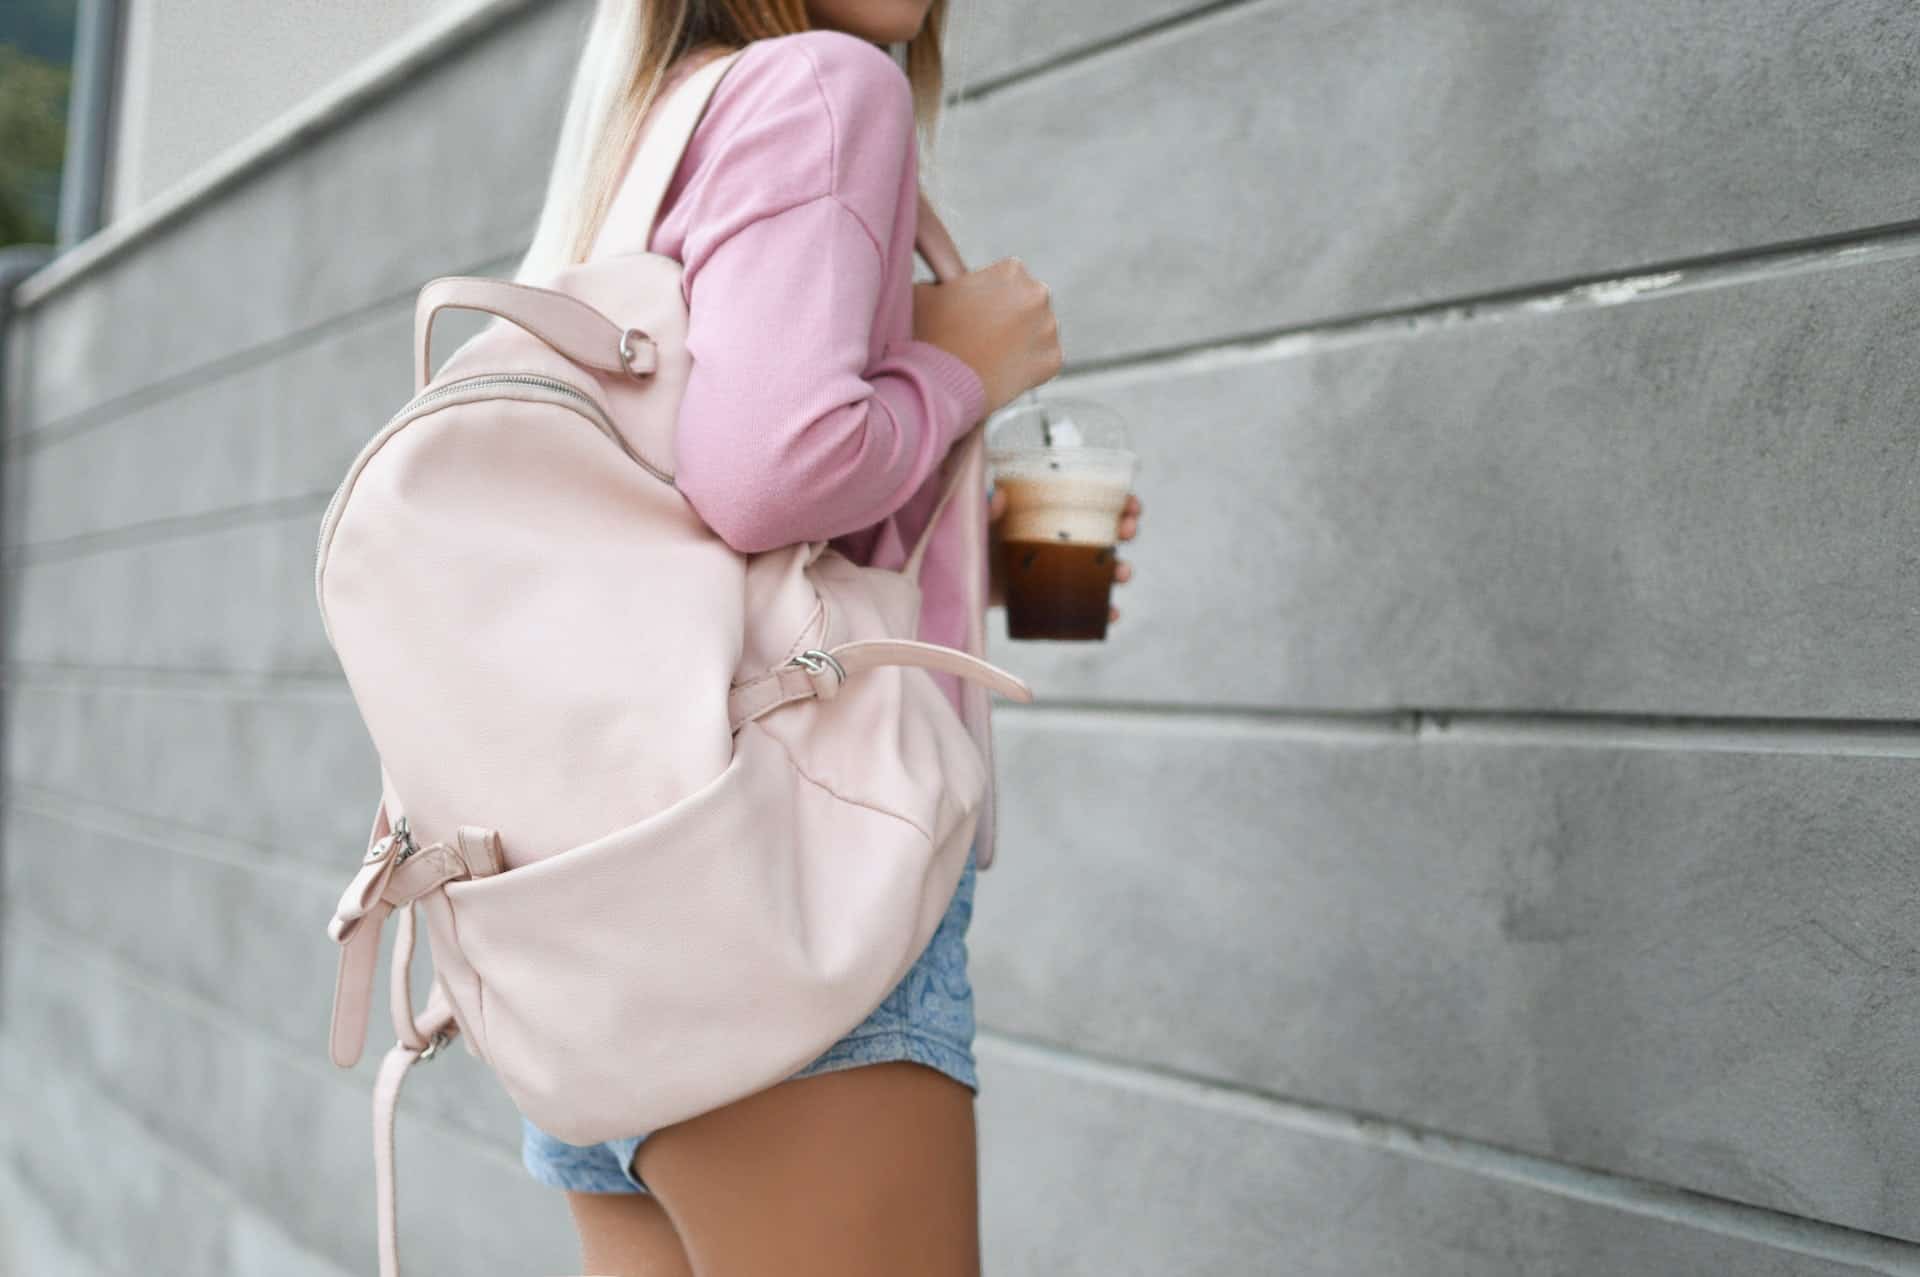 Looking to buy a backpack? Check out our top tips for buying backpacks online!